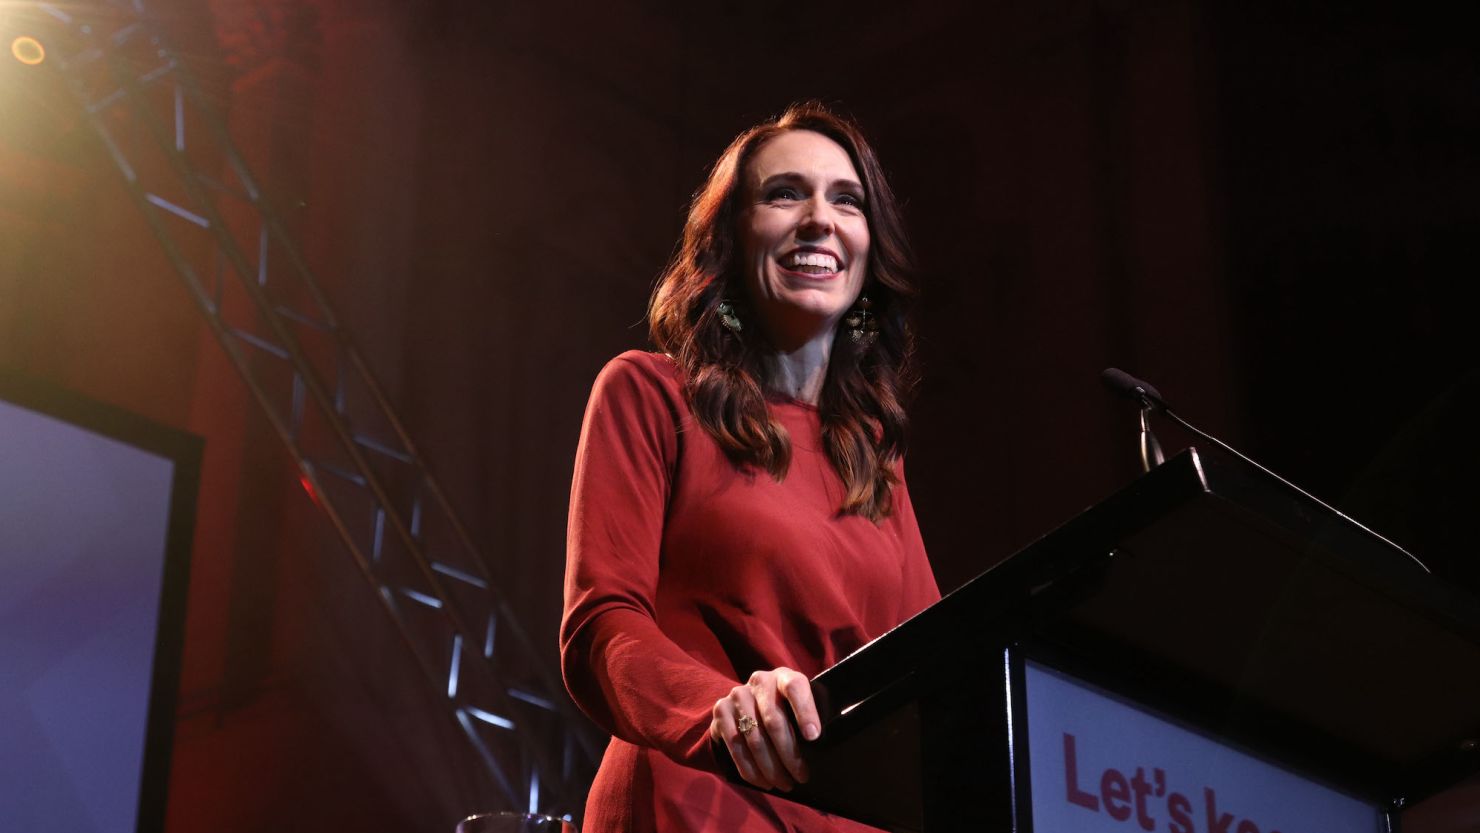 New Zealand Prime Minister Jacinda Ardern delivers her victory speech after being re-elected in a historic landslide win on October 17, 2020.